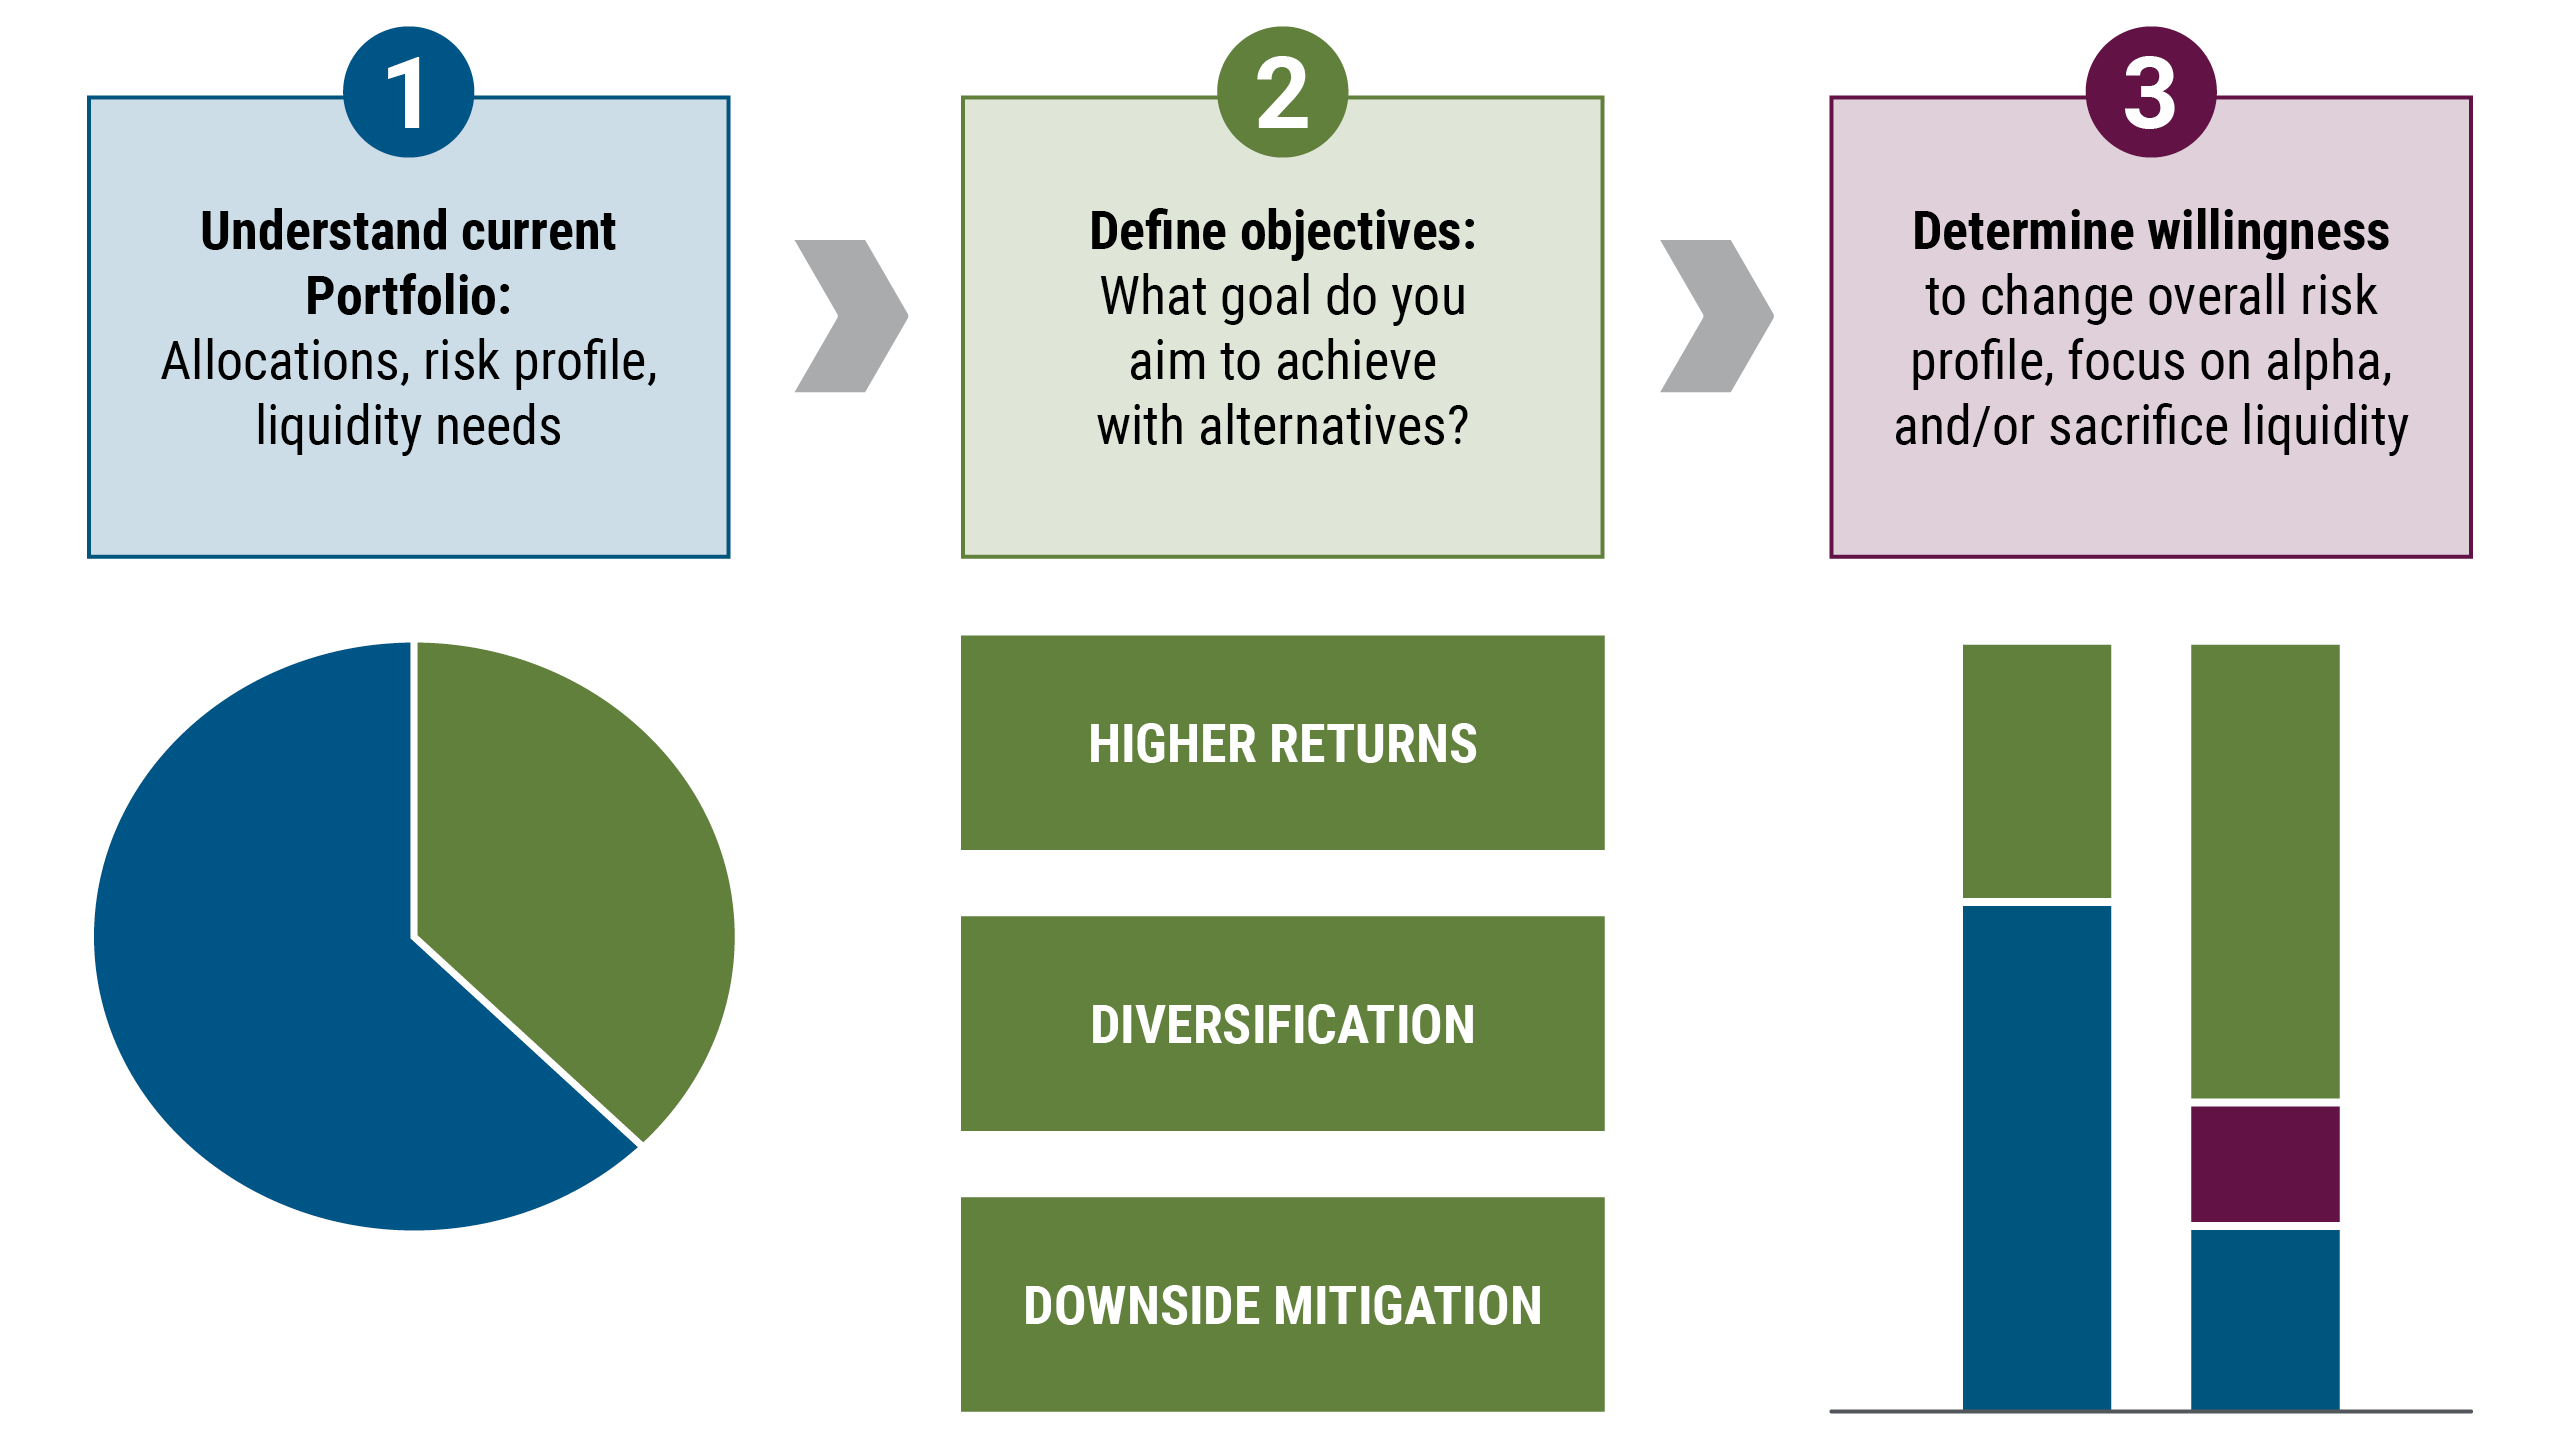 The image is a flow chart showing three steps that can help investors allocate to alternatives. Three boxes at the top of the diagram walk through the steps. The first, on the left, is labeled “understand current portfolio,” meaning its allocations, risk profile and liquidity needs. Underneath is an unlabeled pie chart to illustrate the concept. Next, in the middle of the flow chart, is the second step, with the title “define objectives,” noting the goal needs to be considered. Underneath are boxes labeled with the different objectives of higher returns, diversification, and downside mitigation. Last, on the right, is another box also labeled “define objectives,” repeating the same as the second box, but with a bar chart shown below it to illustrate the concept. 